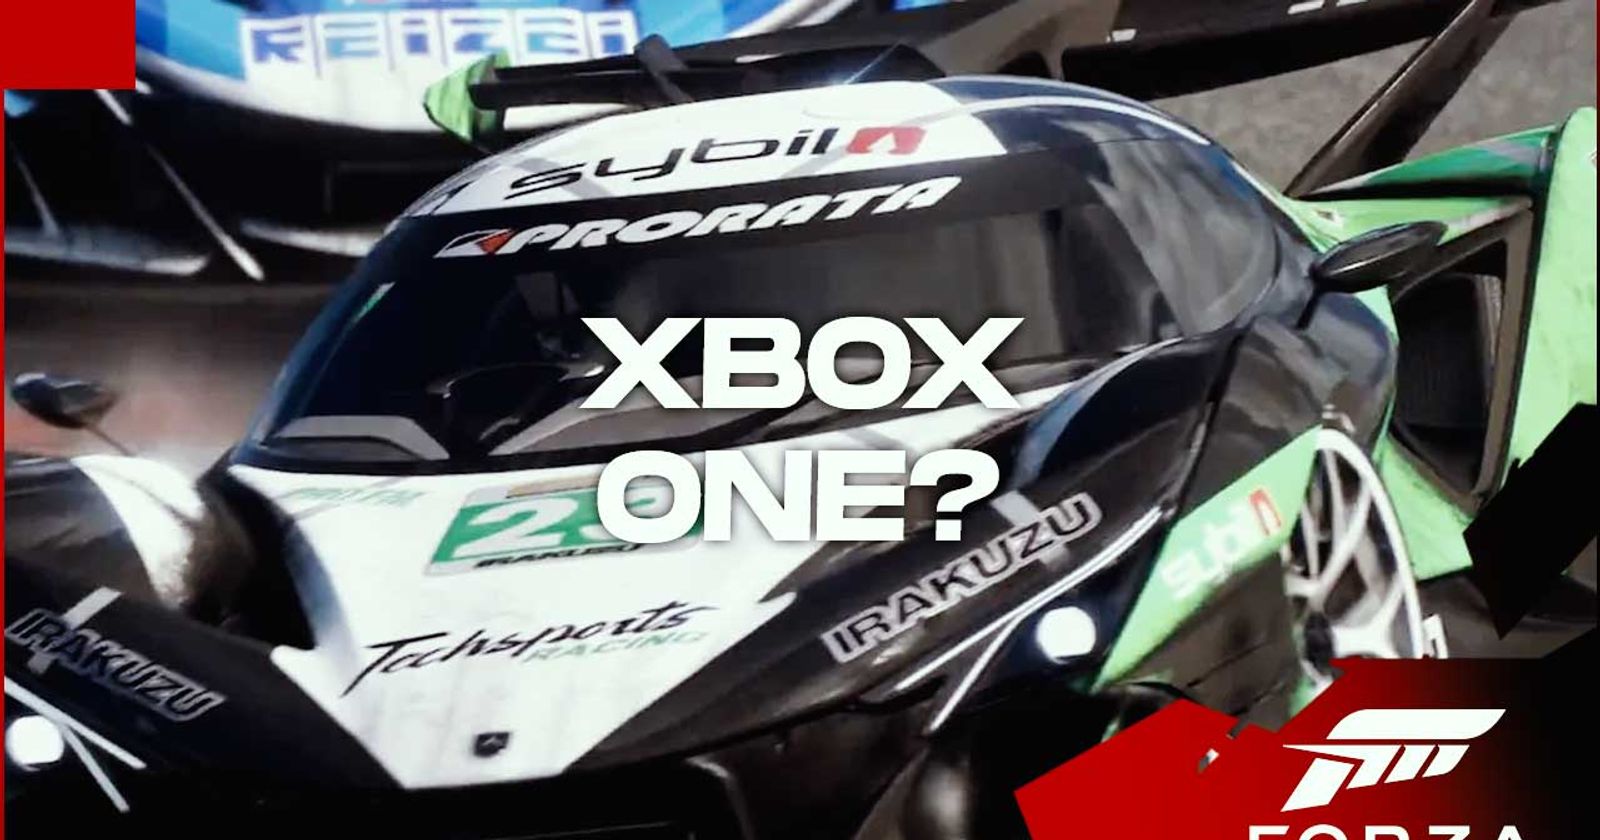 Forza Motorsport Details and Gameplay Revealed During Xbox